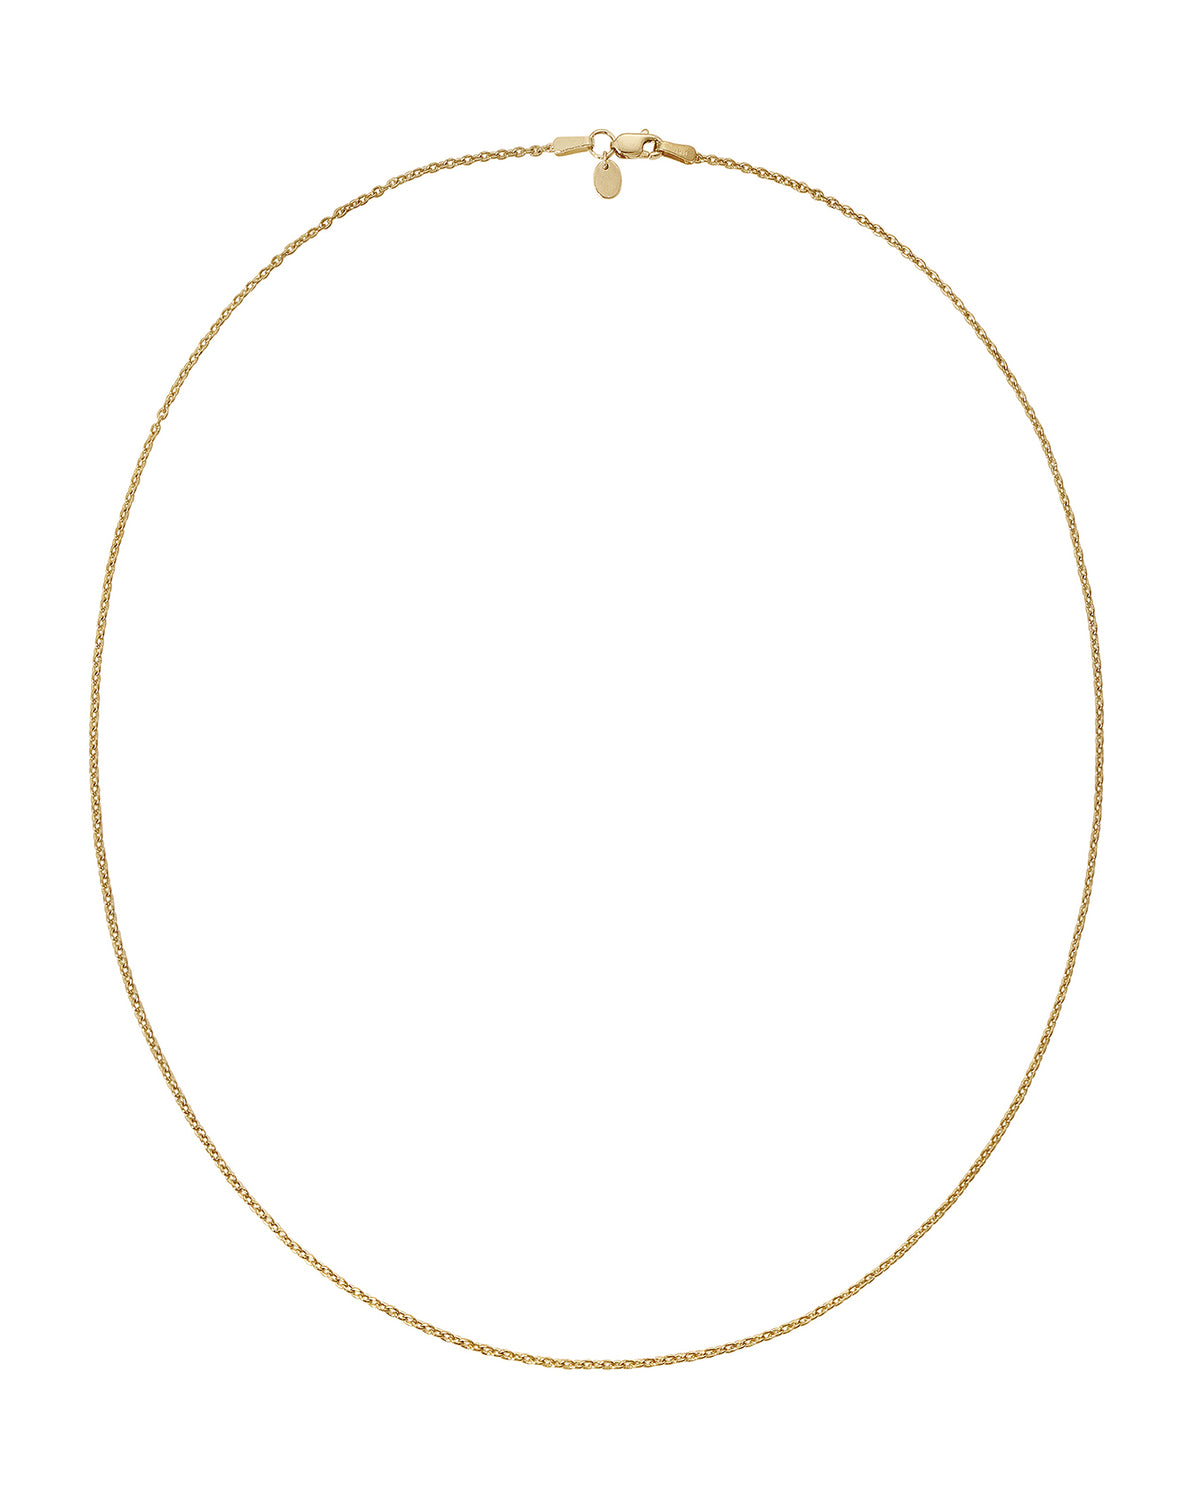 14K Gold Cable Chain Necklace - 24"